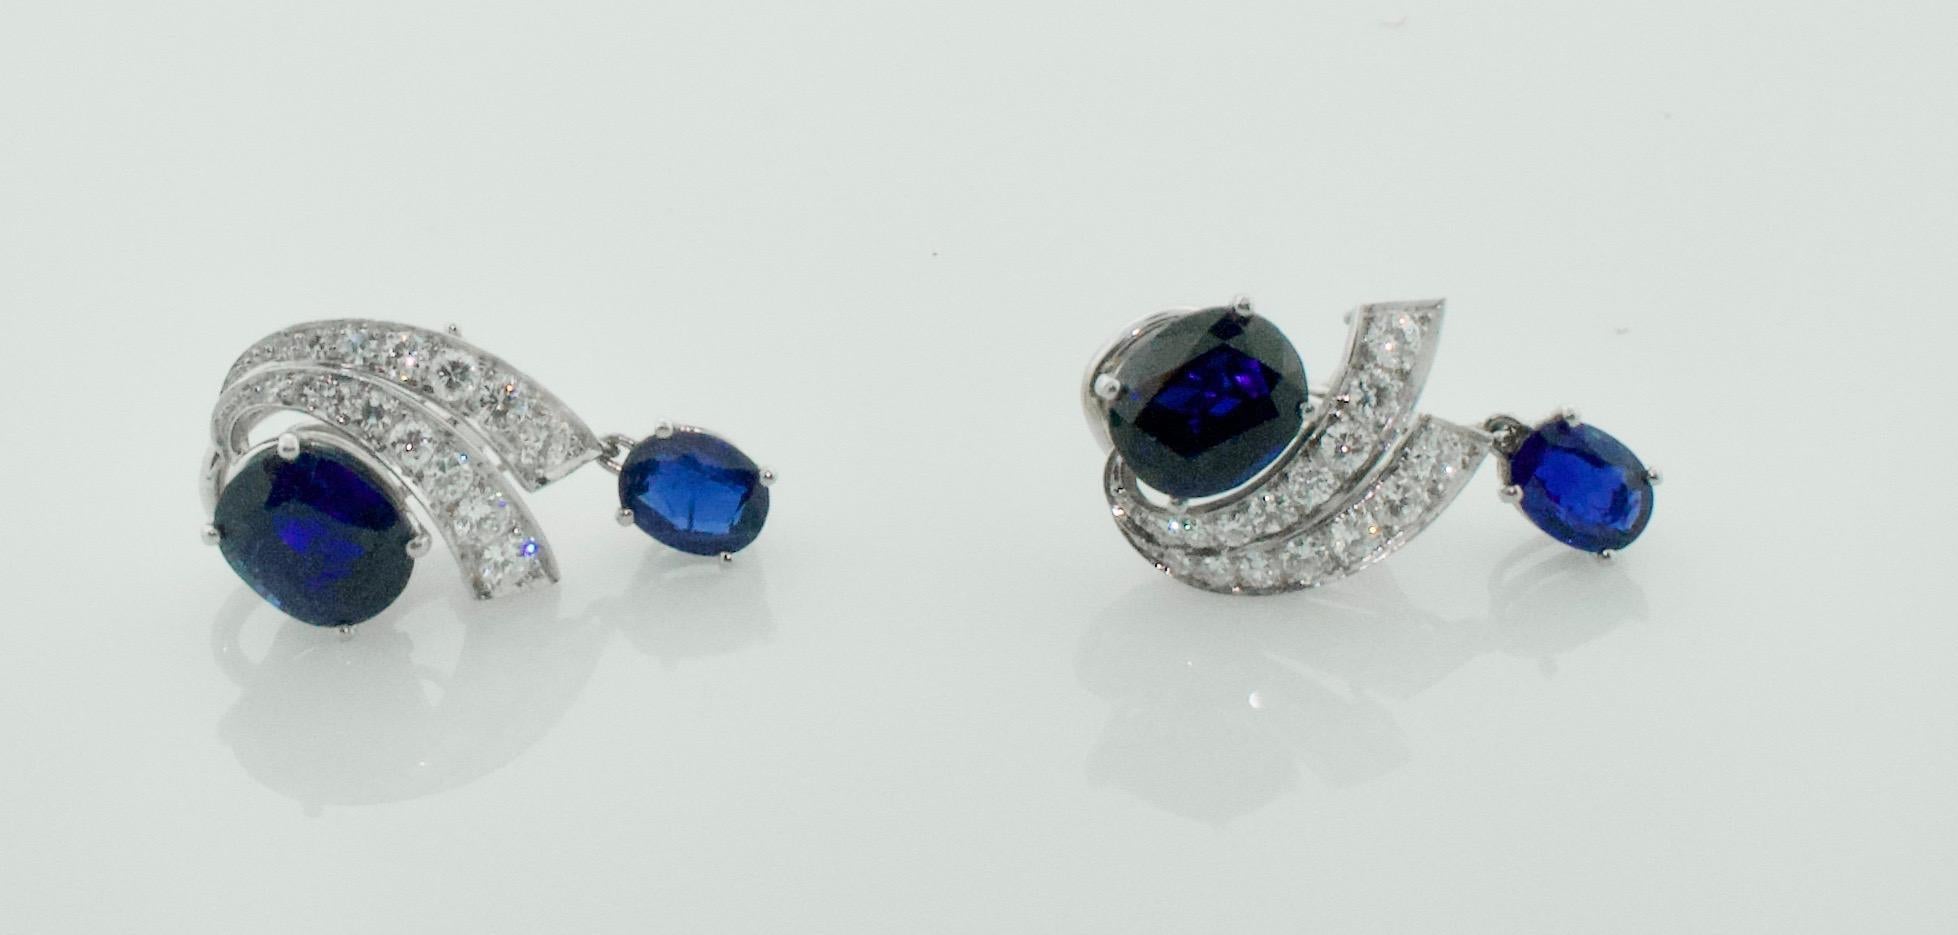 Sapphire and Diamond Platinum Earrings circa 1940's 7.10 cts. of Sapphire
Two Oval Sapphires weighing 5.50 carats approximately [bright with no imperfections visible to the naked eye]
Two Oval Sapphires weighing 1.60 carats approximately [bright